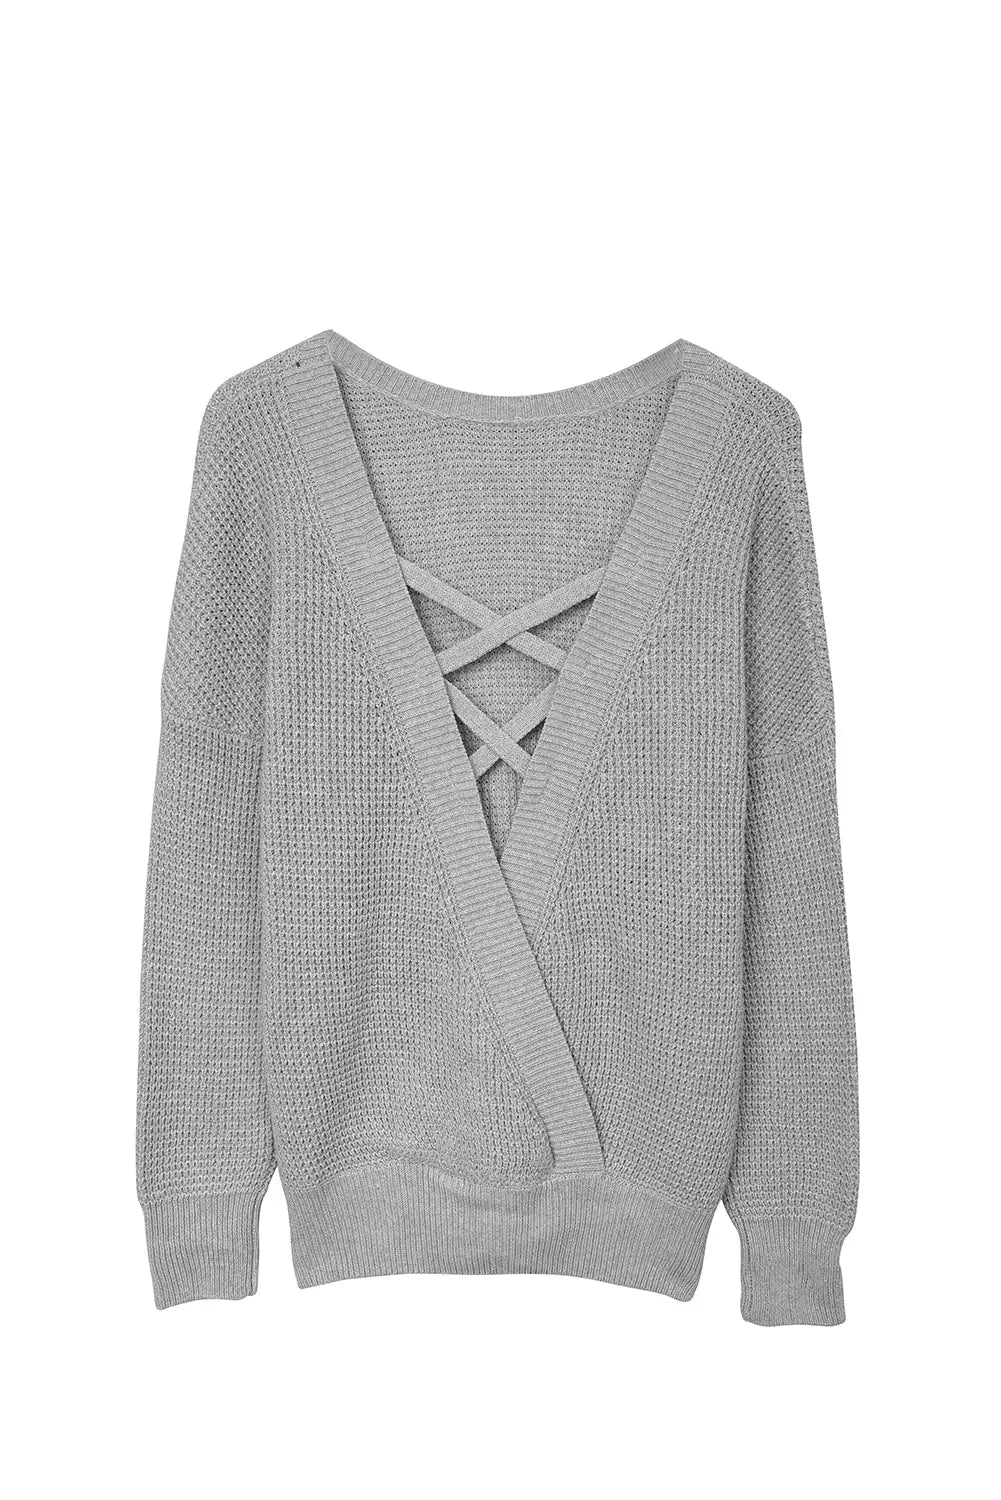 Gray Cross Back Hollow-out Sweater-12